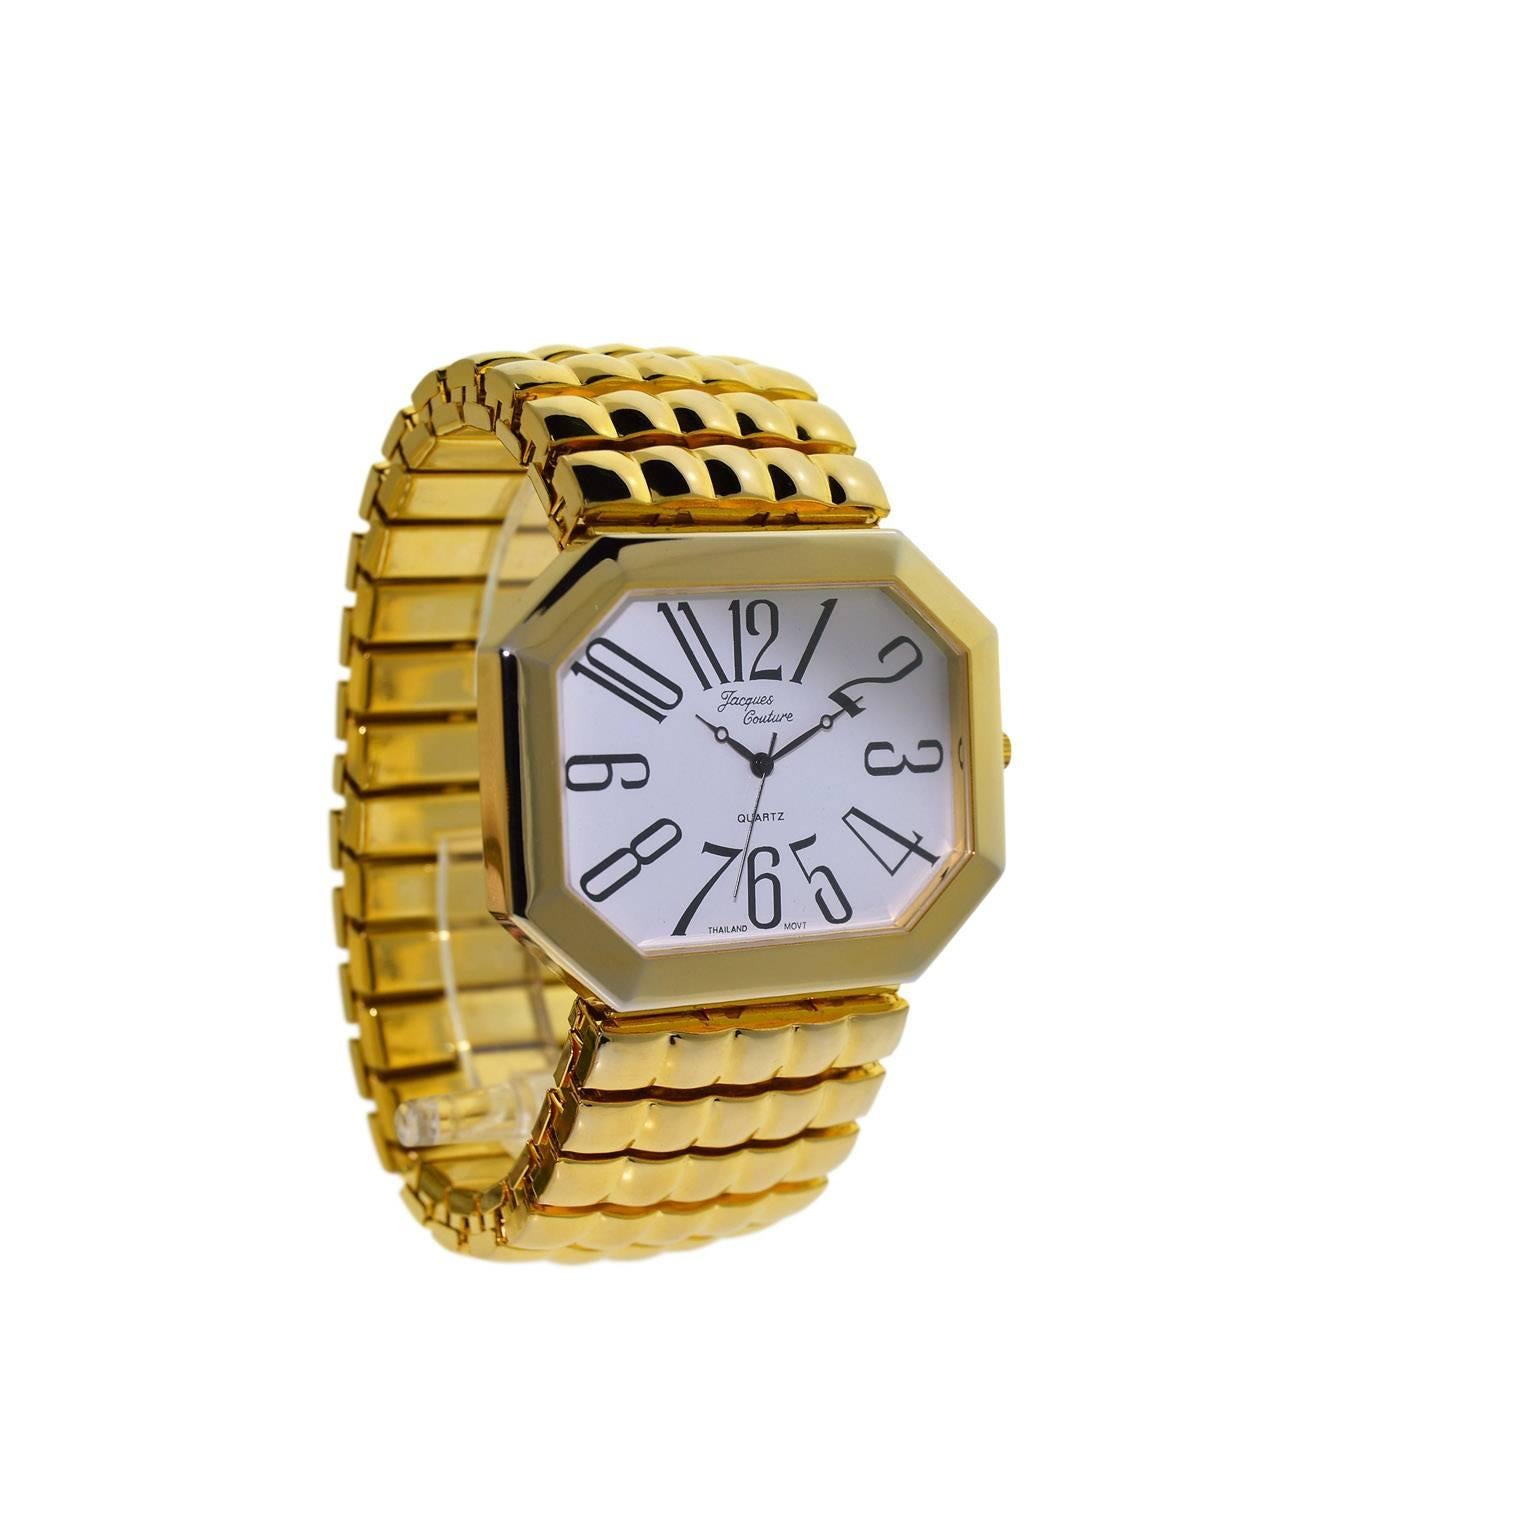 Modern Jacques Gold Plated Couture Fashion Oversized Quartz Watch, circa 1980s For Sale